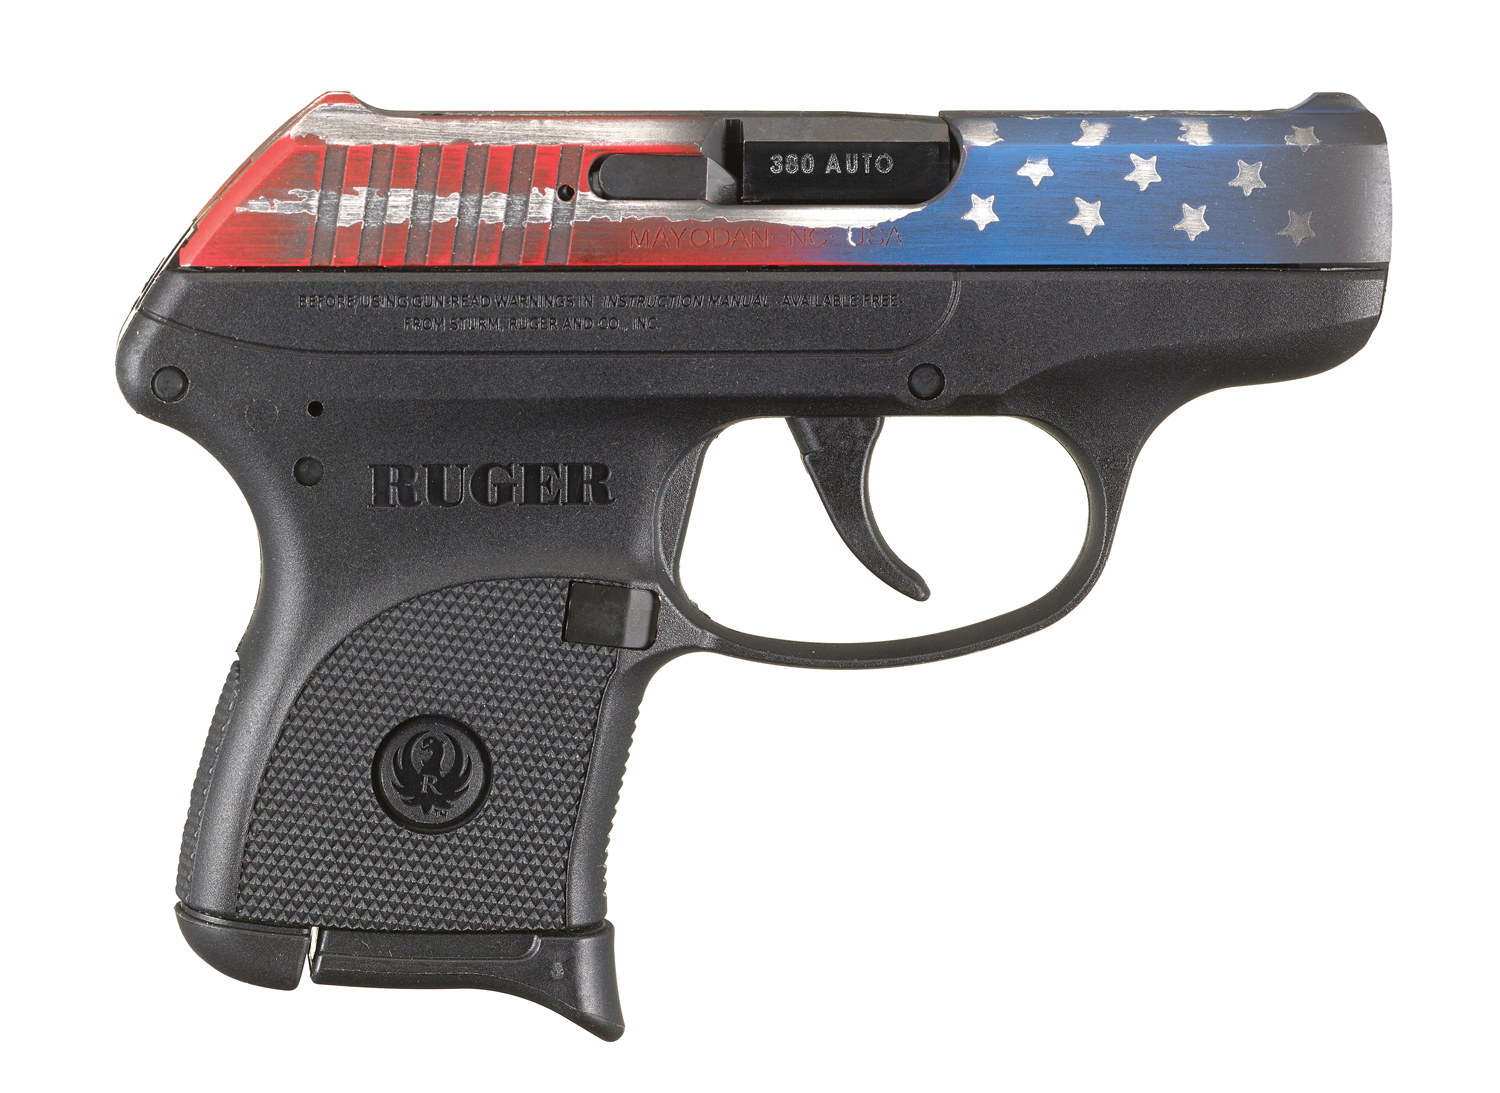 Ruger 380 LCP with American flag on slide